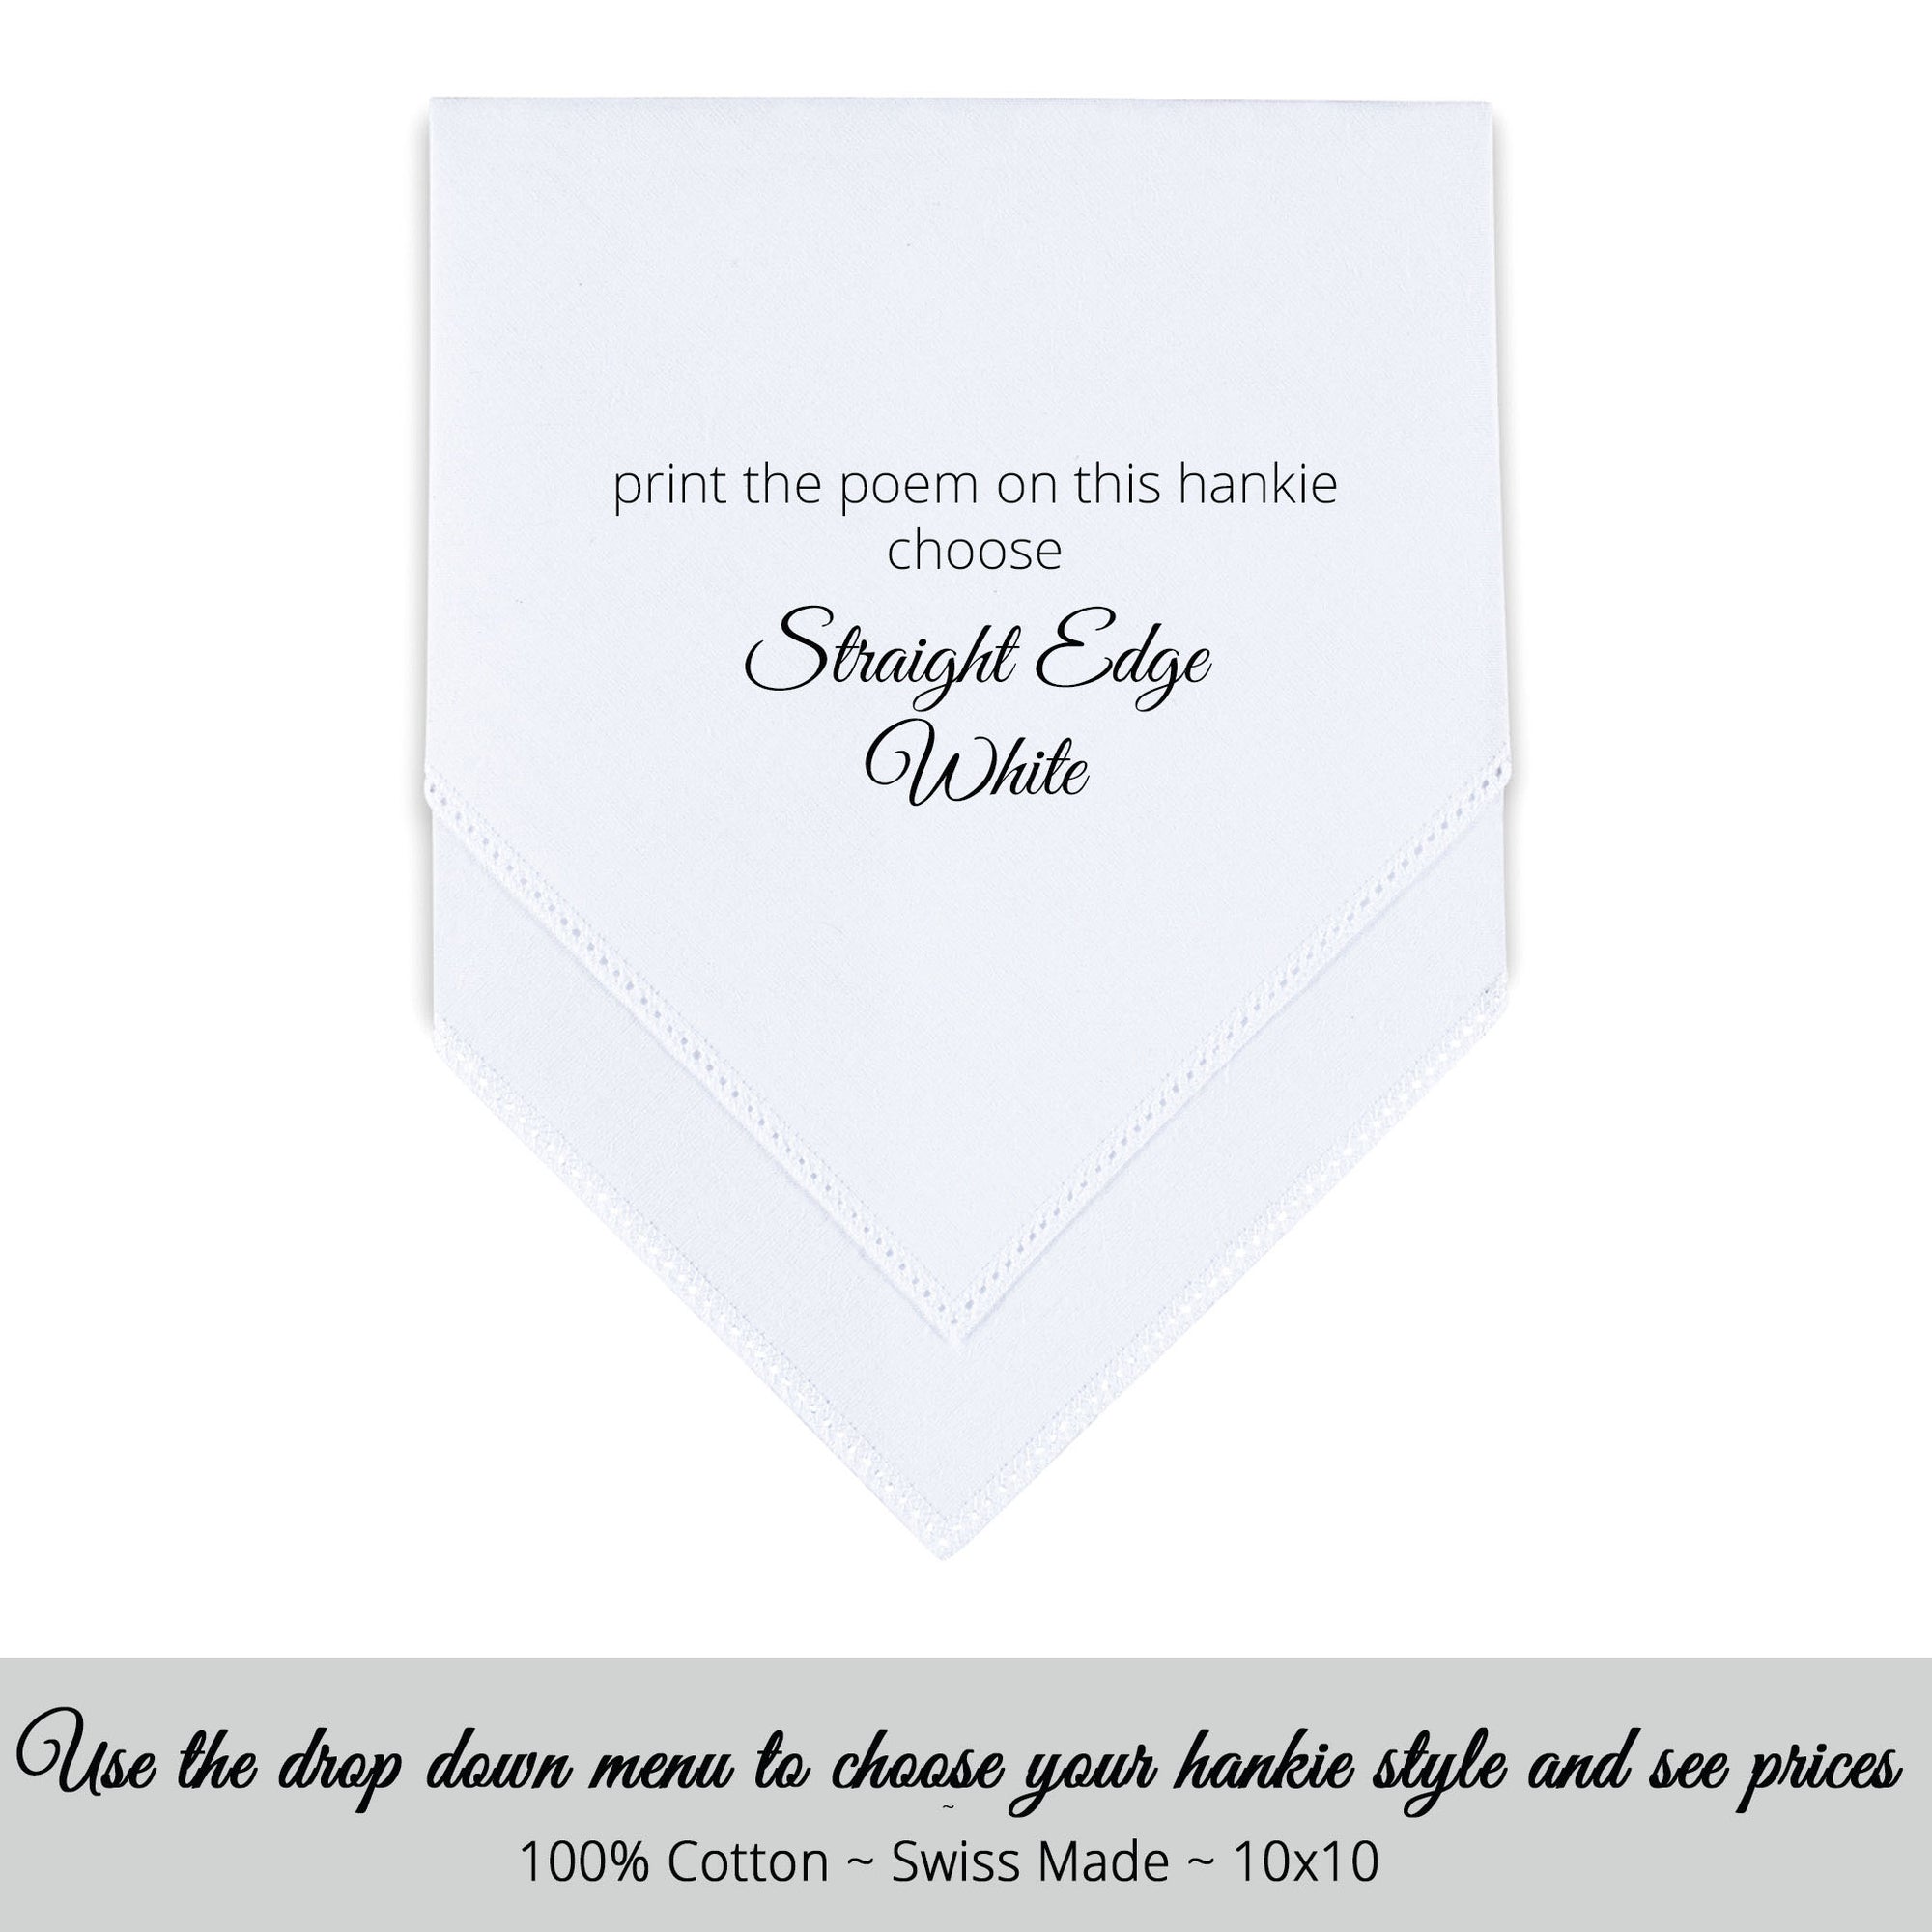 Straight edge white personalized wedding handkerchief for the mother of the bride